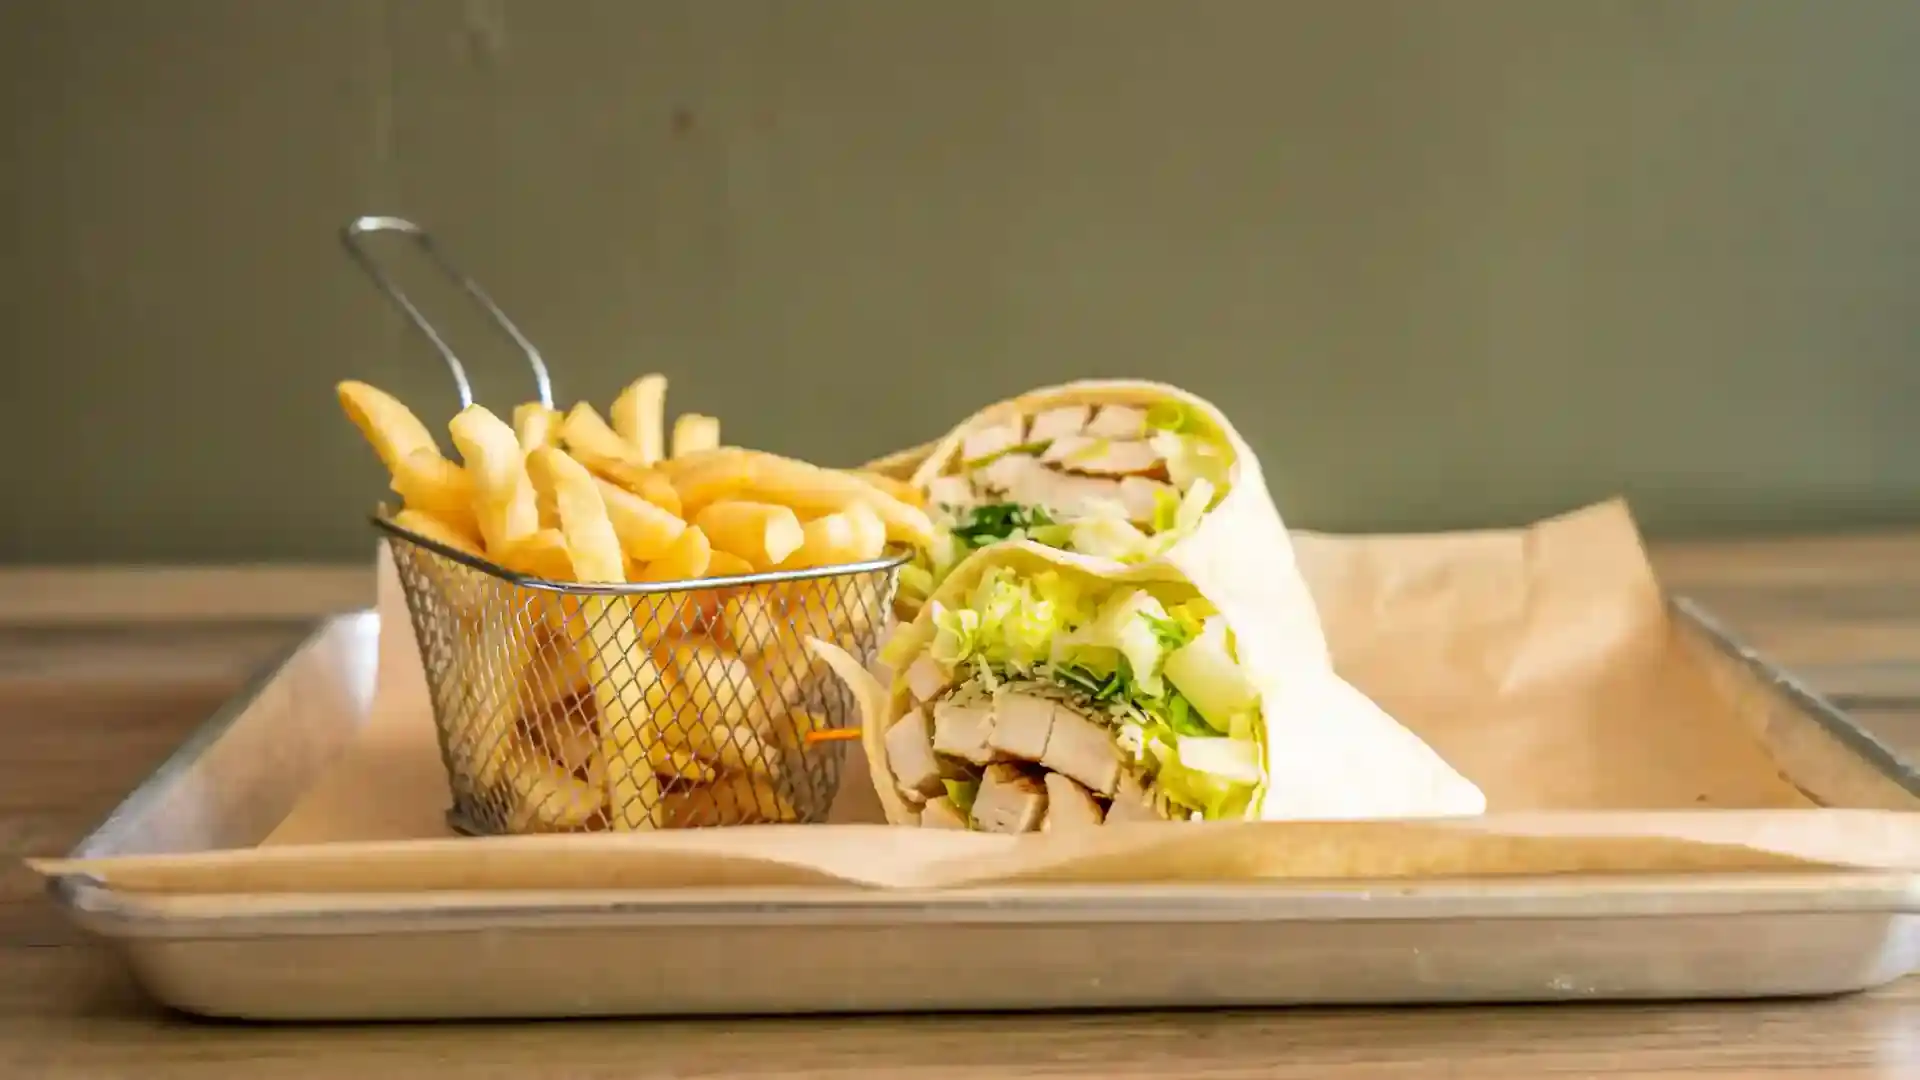 Chicken wrap with fries